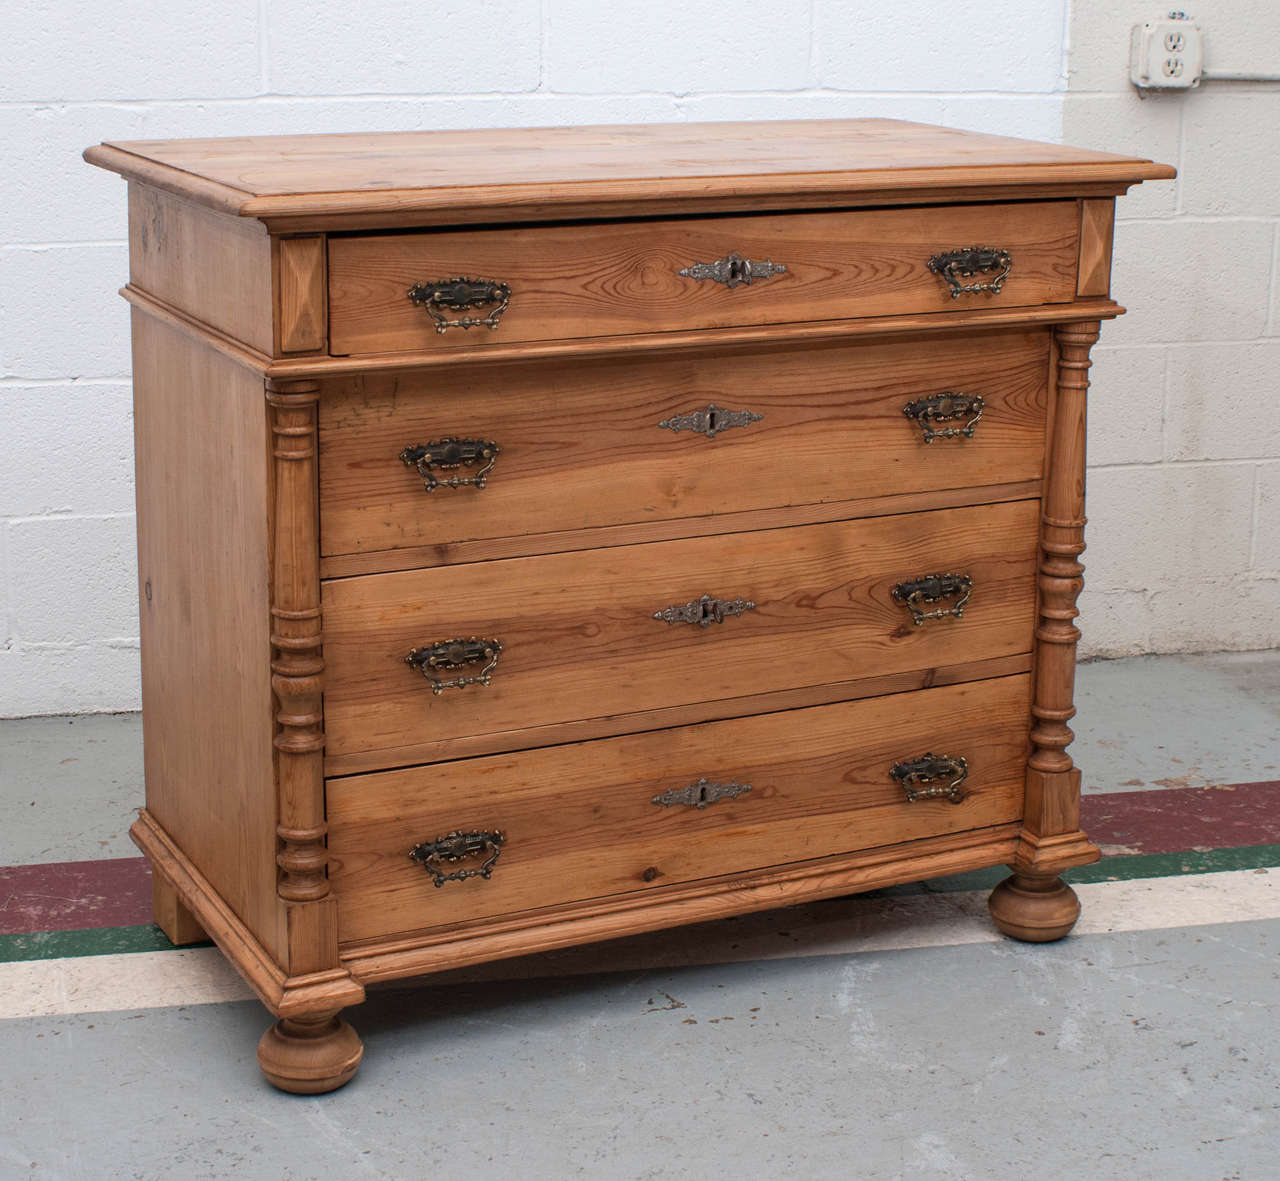 This is an outstanding pine chest of four hand-cut dovetailed drawers flanked by turned split balusters.  It is sturdy and heavy and is beautifully constructed with all the features we like to see in a late nineteenth century German chest.  The